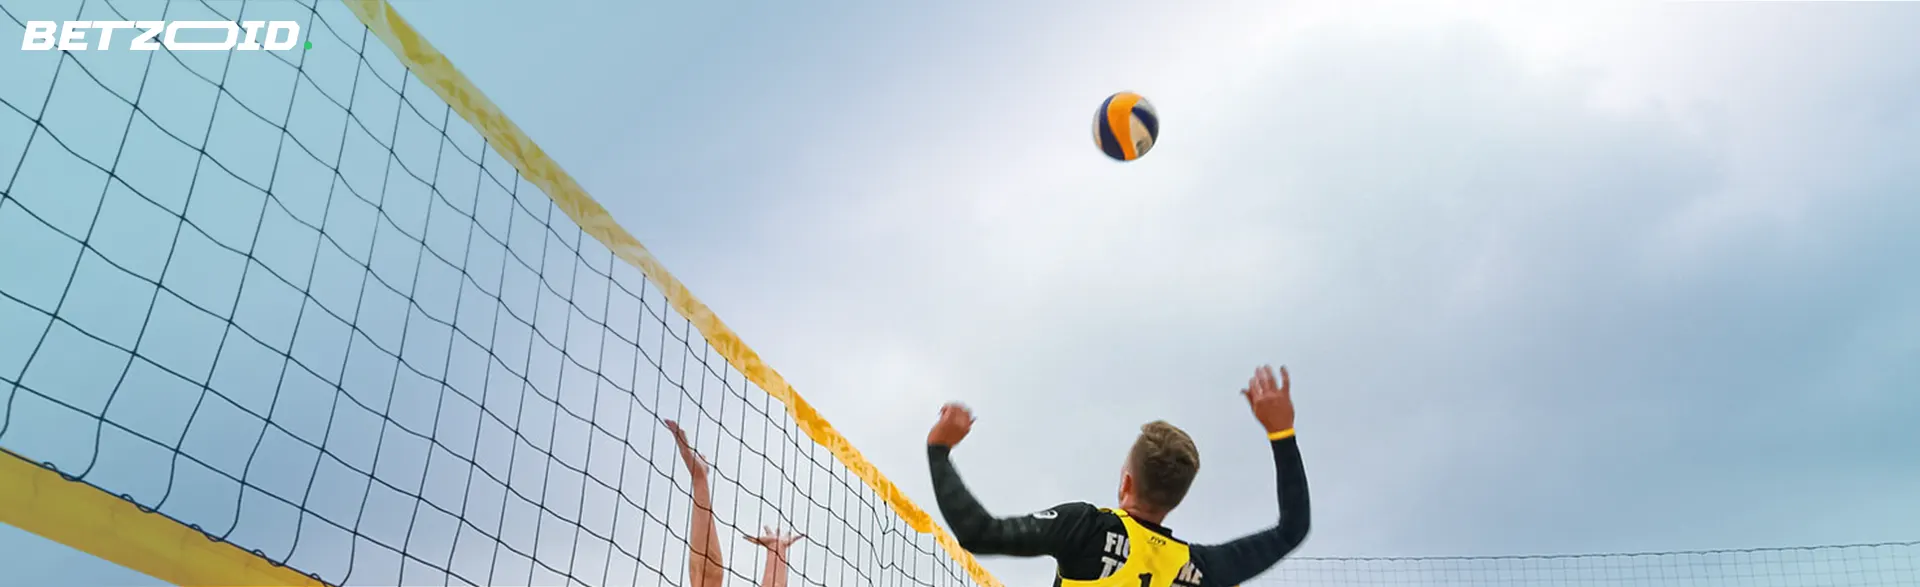 Game of volleyball is being played, the ball flies over the net after a player hits it.